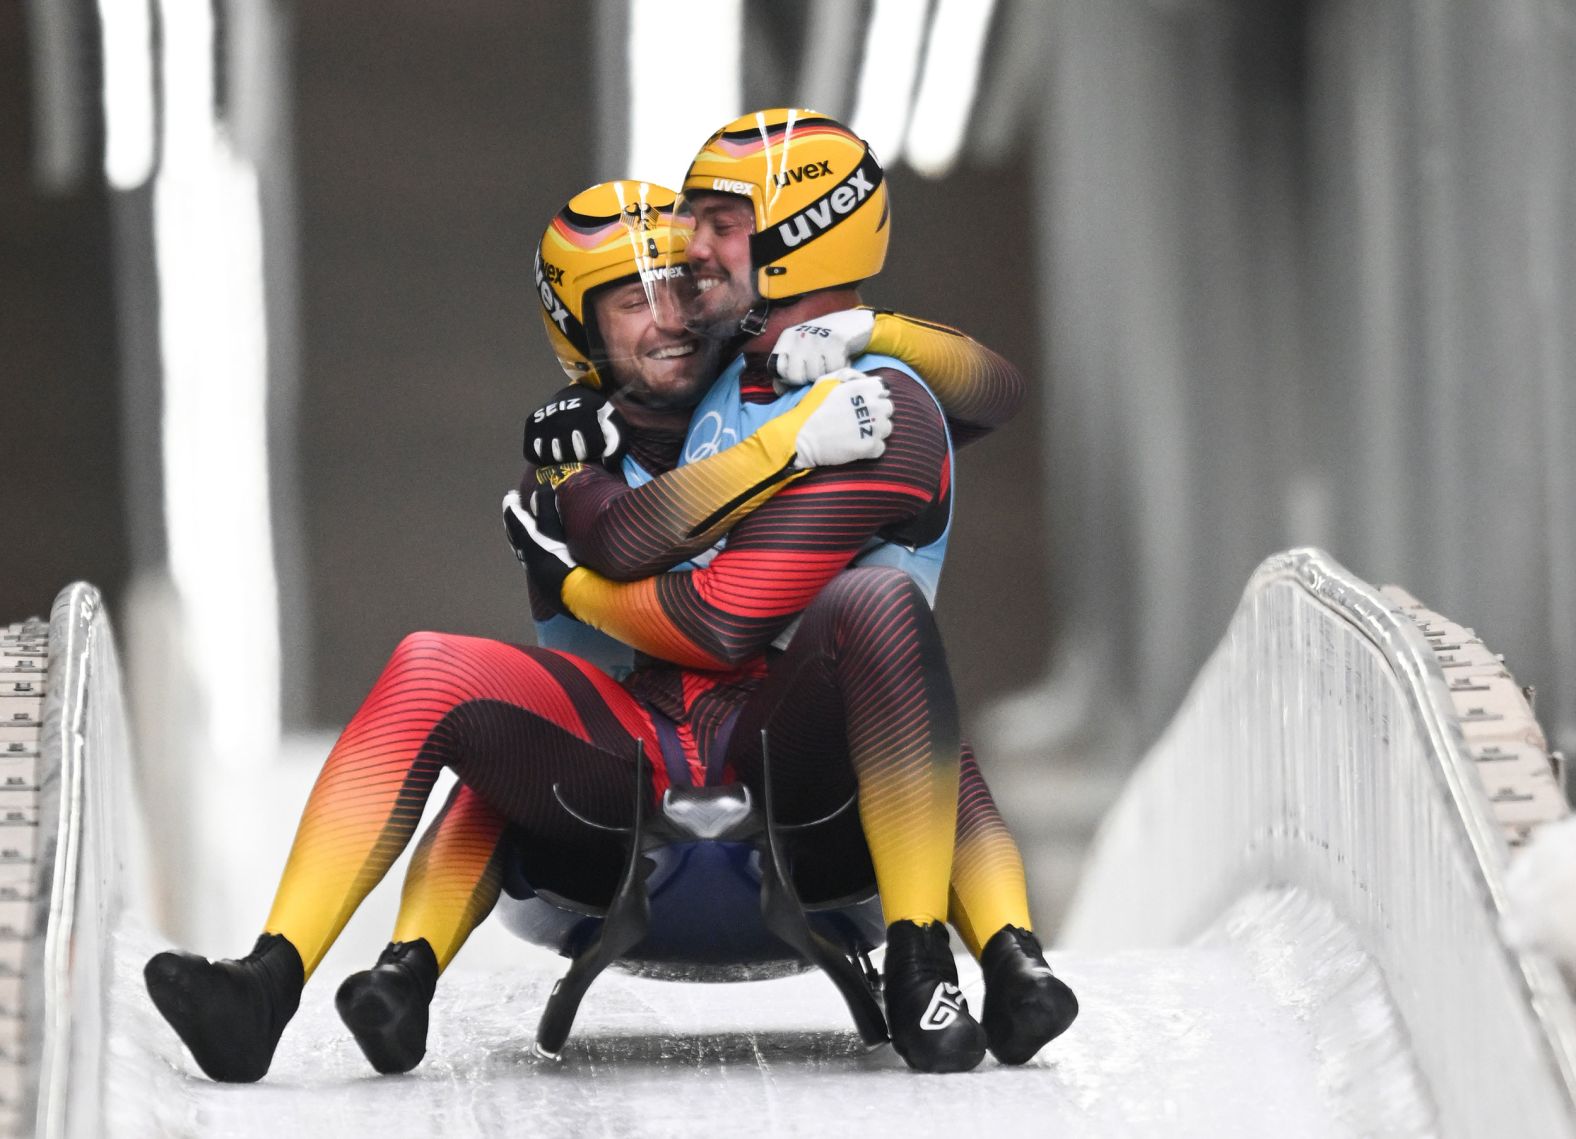 Germany's Tobias Wendl and Tobias Arlt celebrate after winning gold in doubles luge on February 9. <a href="index.php?page=&url=https%3A%2F%2Fwww.cnn.com%2Fworld%2Flive-news%2Fbeijing-winter-olympics-02-09-22-spt%2Fh_b1bdfa40fda30088512448639fd633d0" target="_blank">The pair made history</a> by becoming the first doubles luge team to win three consecutive golds.